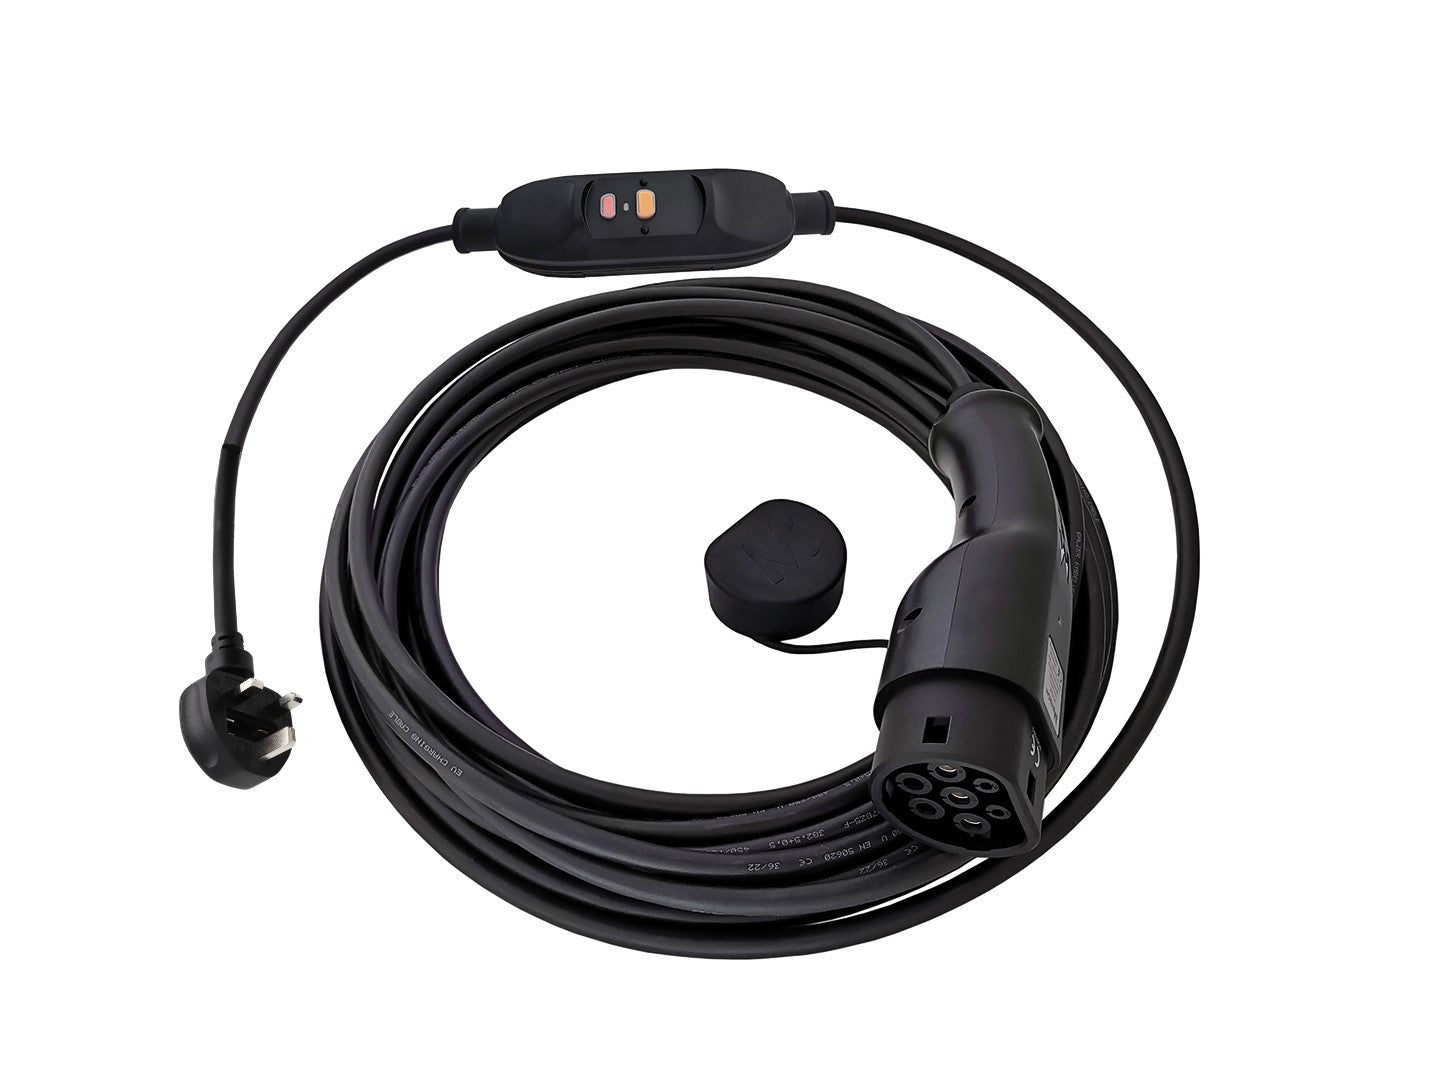 Type 2 Electric Vehicle EV Charging Cables - EasbyEV